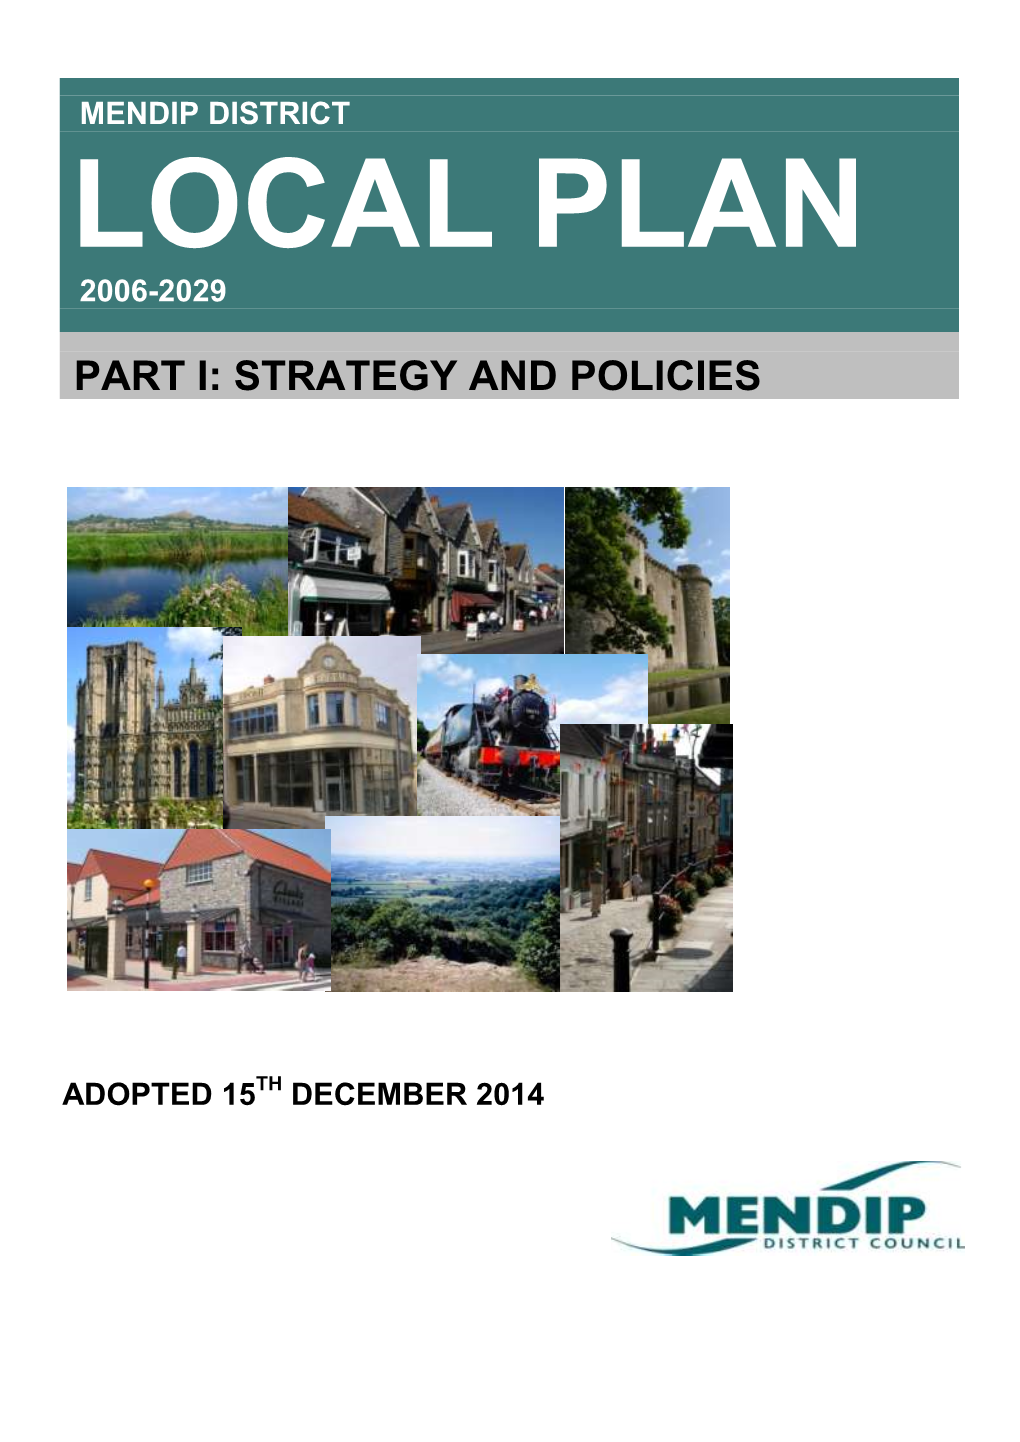 Adopted Local Plan 2014